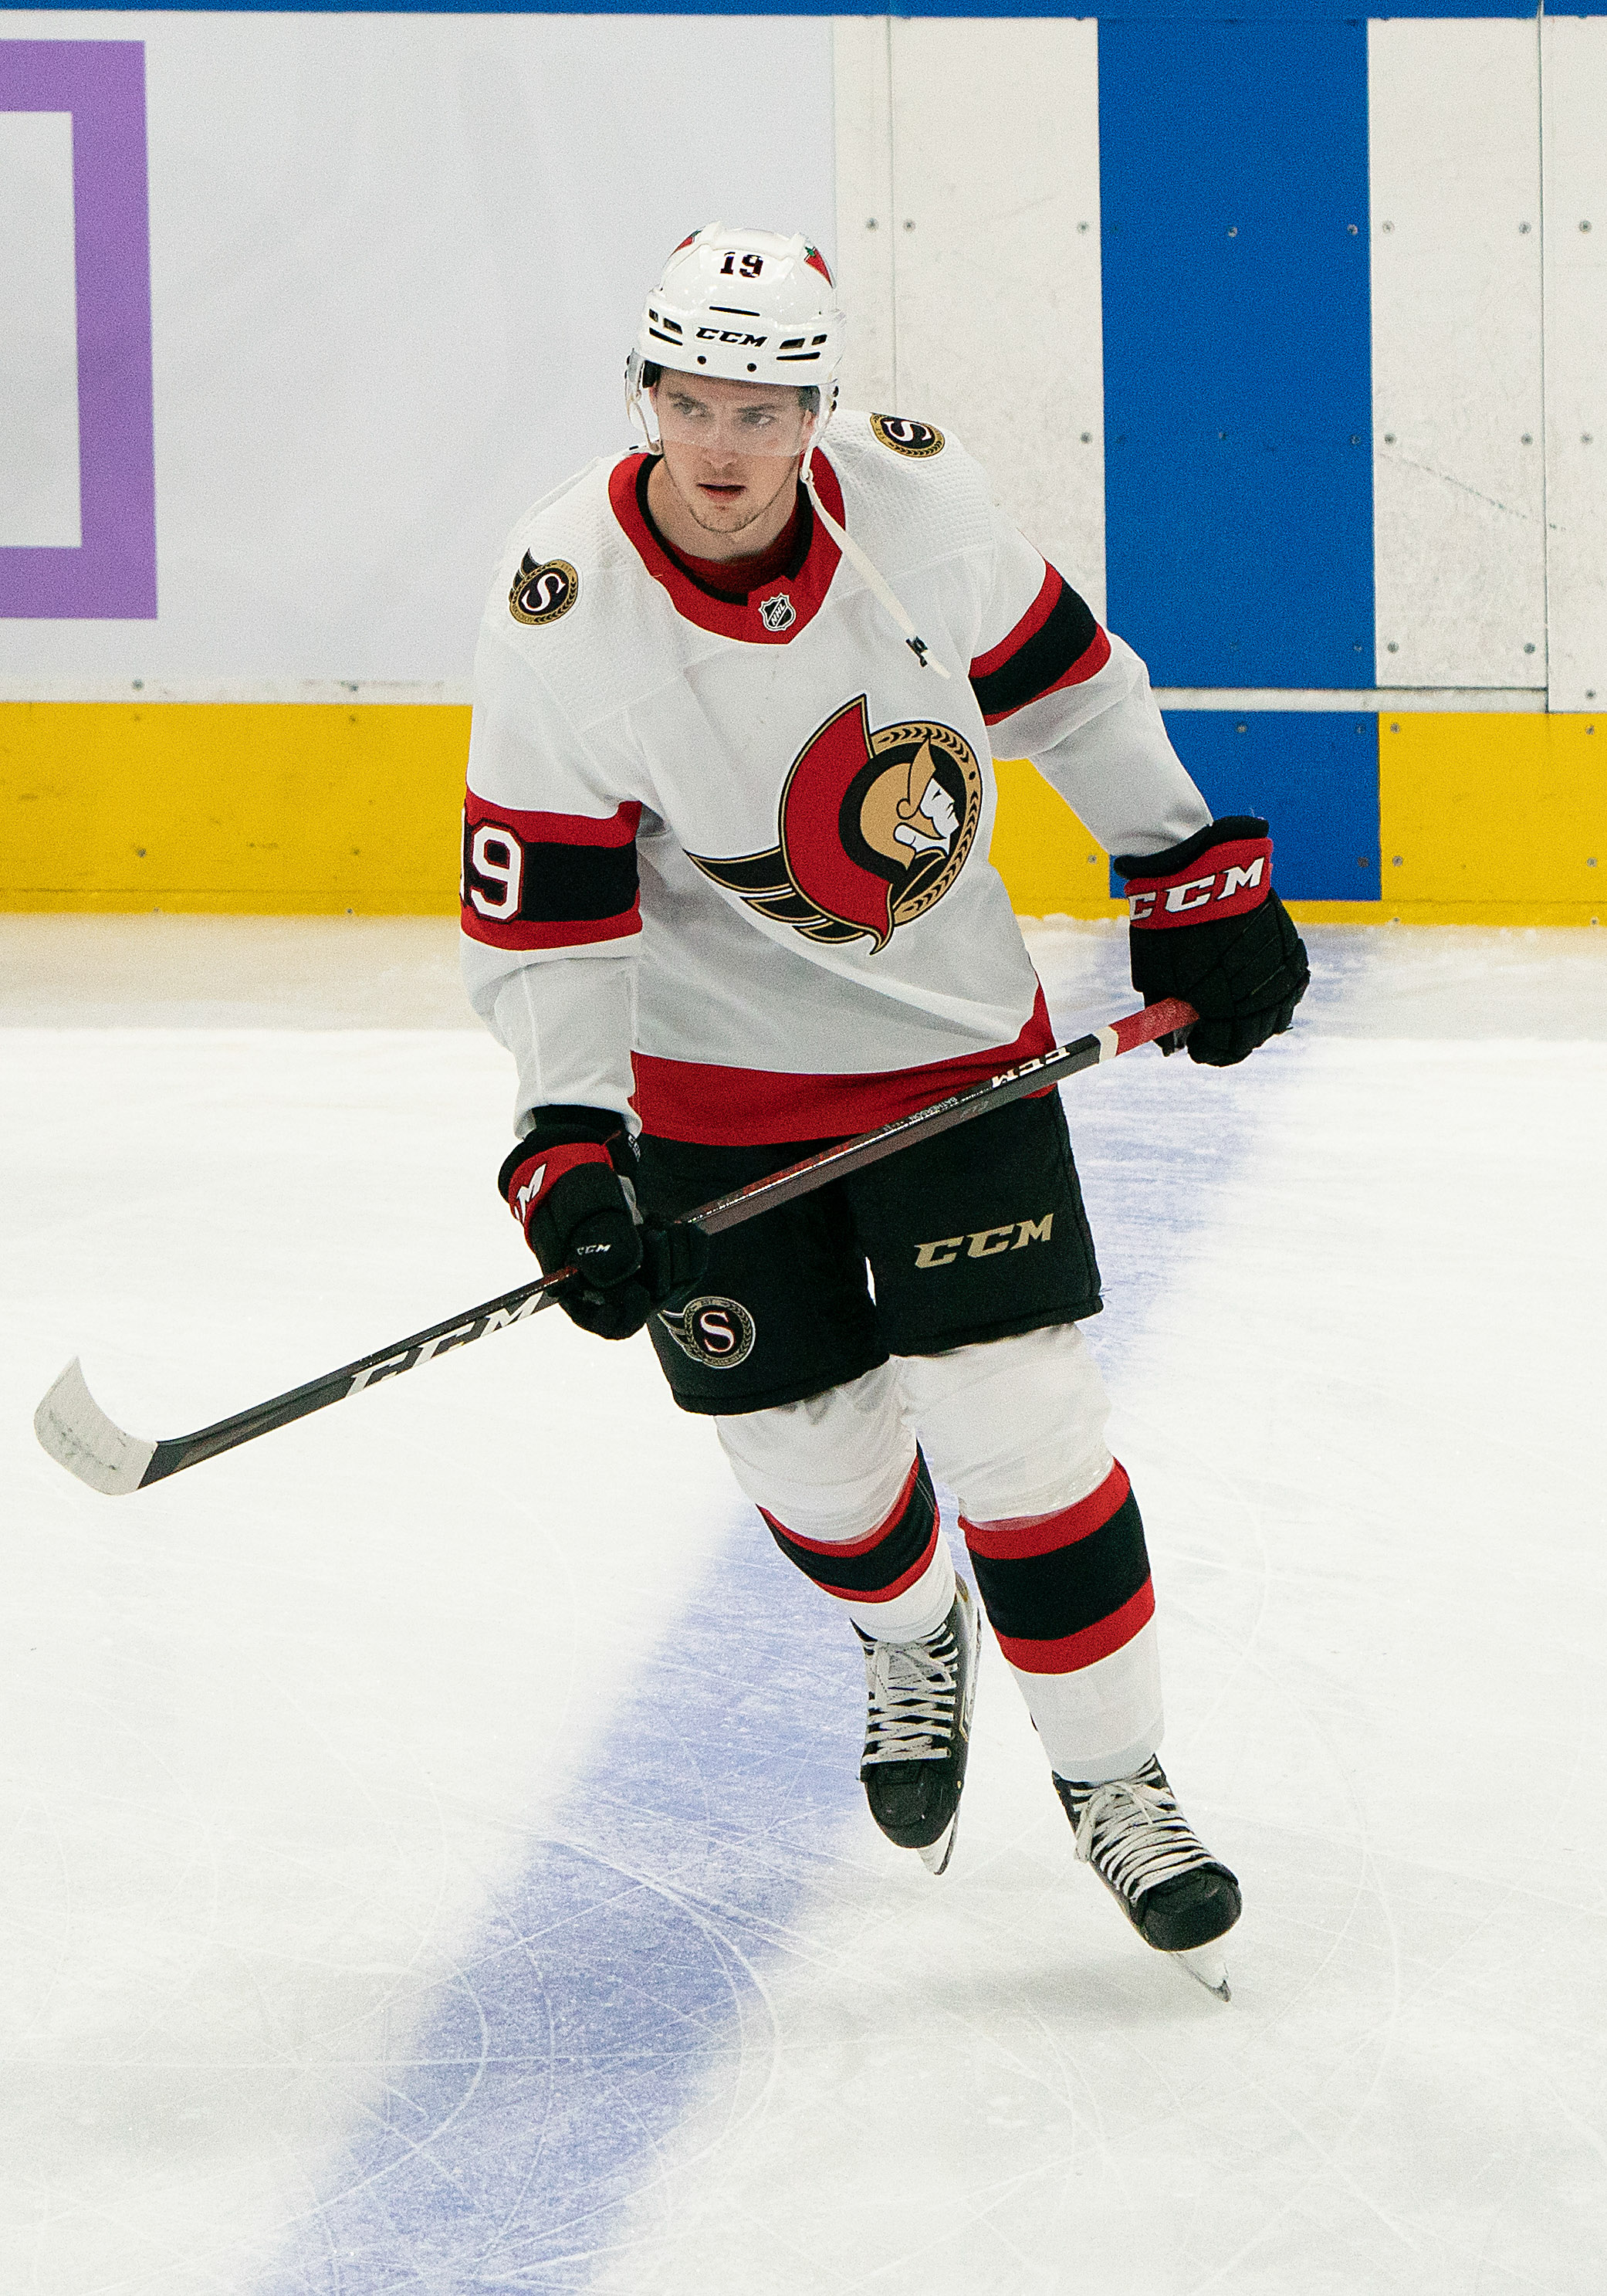 Like father, like son: Batherson signs pro deal with Sens